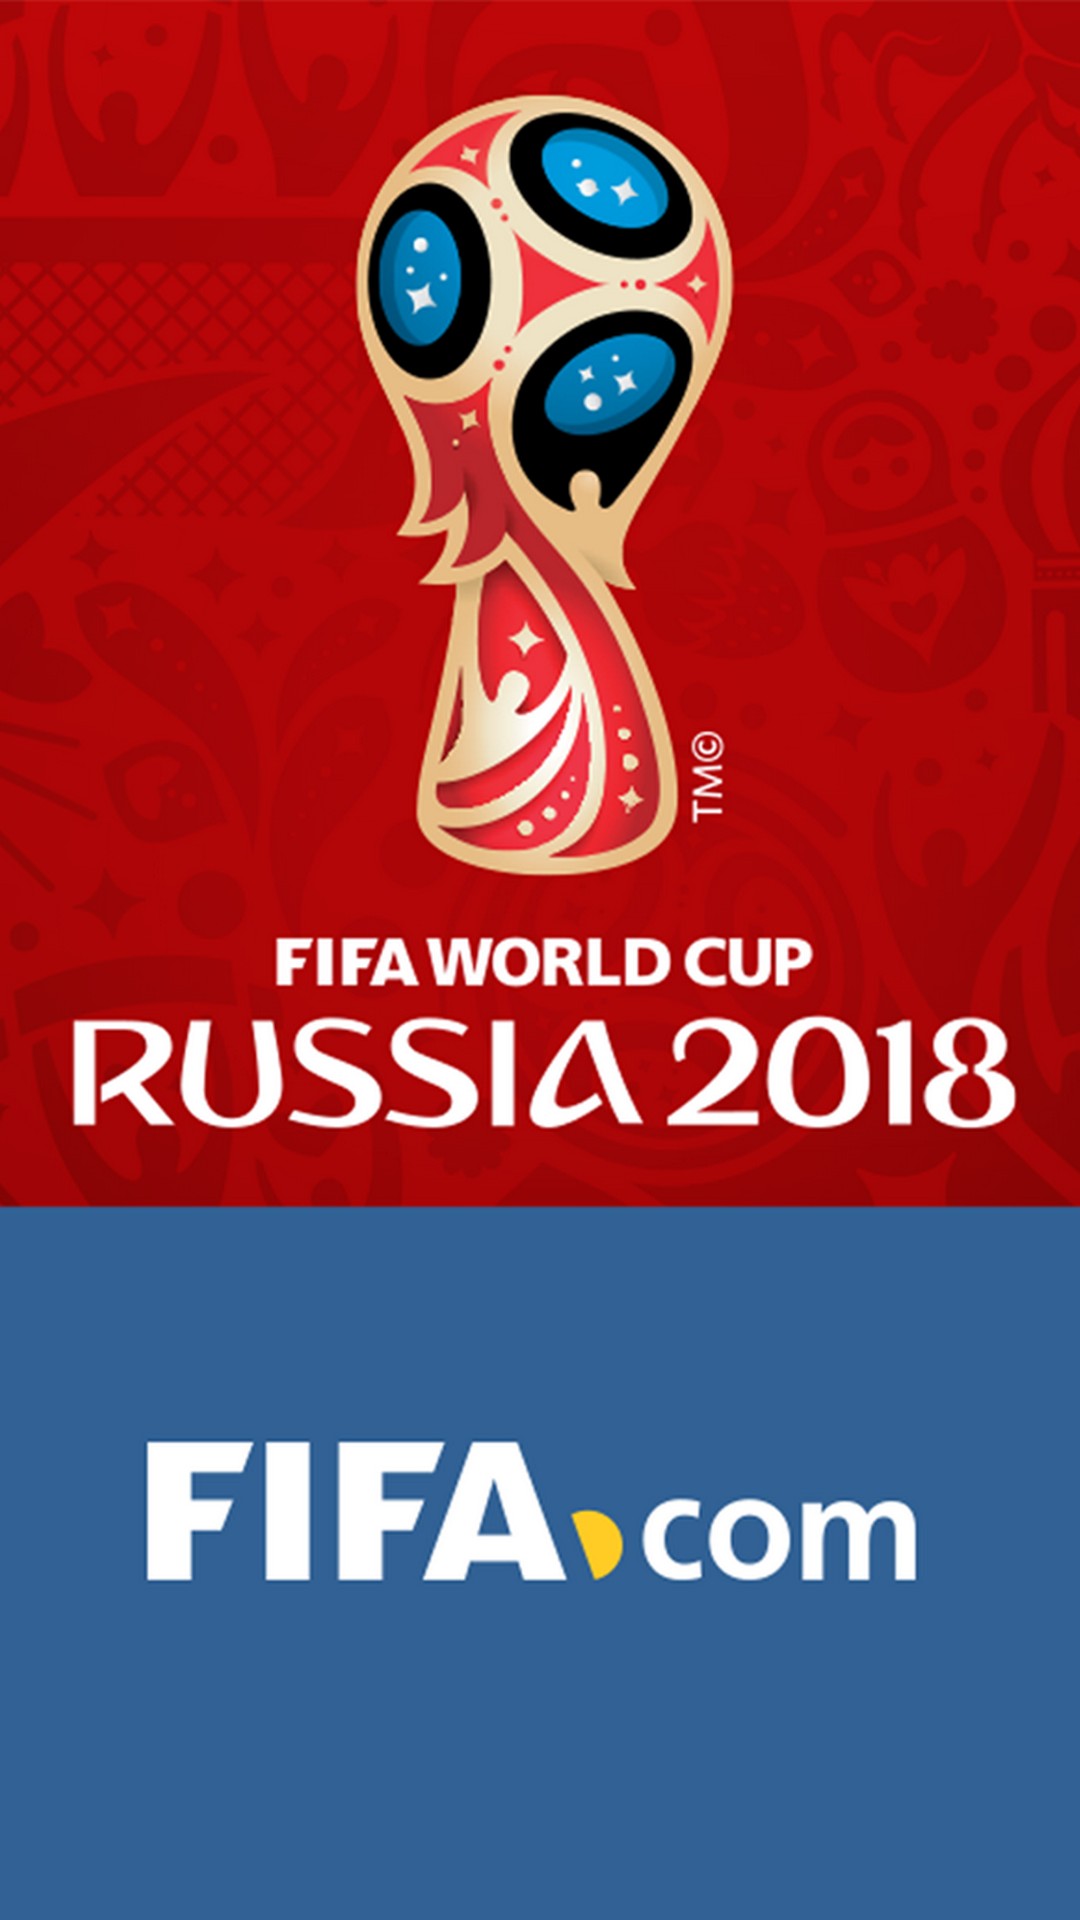 2018 World Cup iPhone Wallpaper resolution 1080x1920